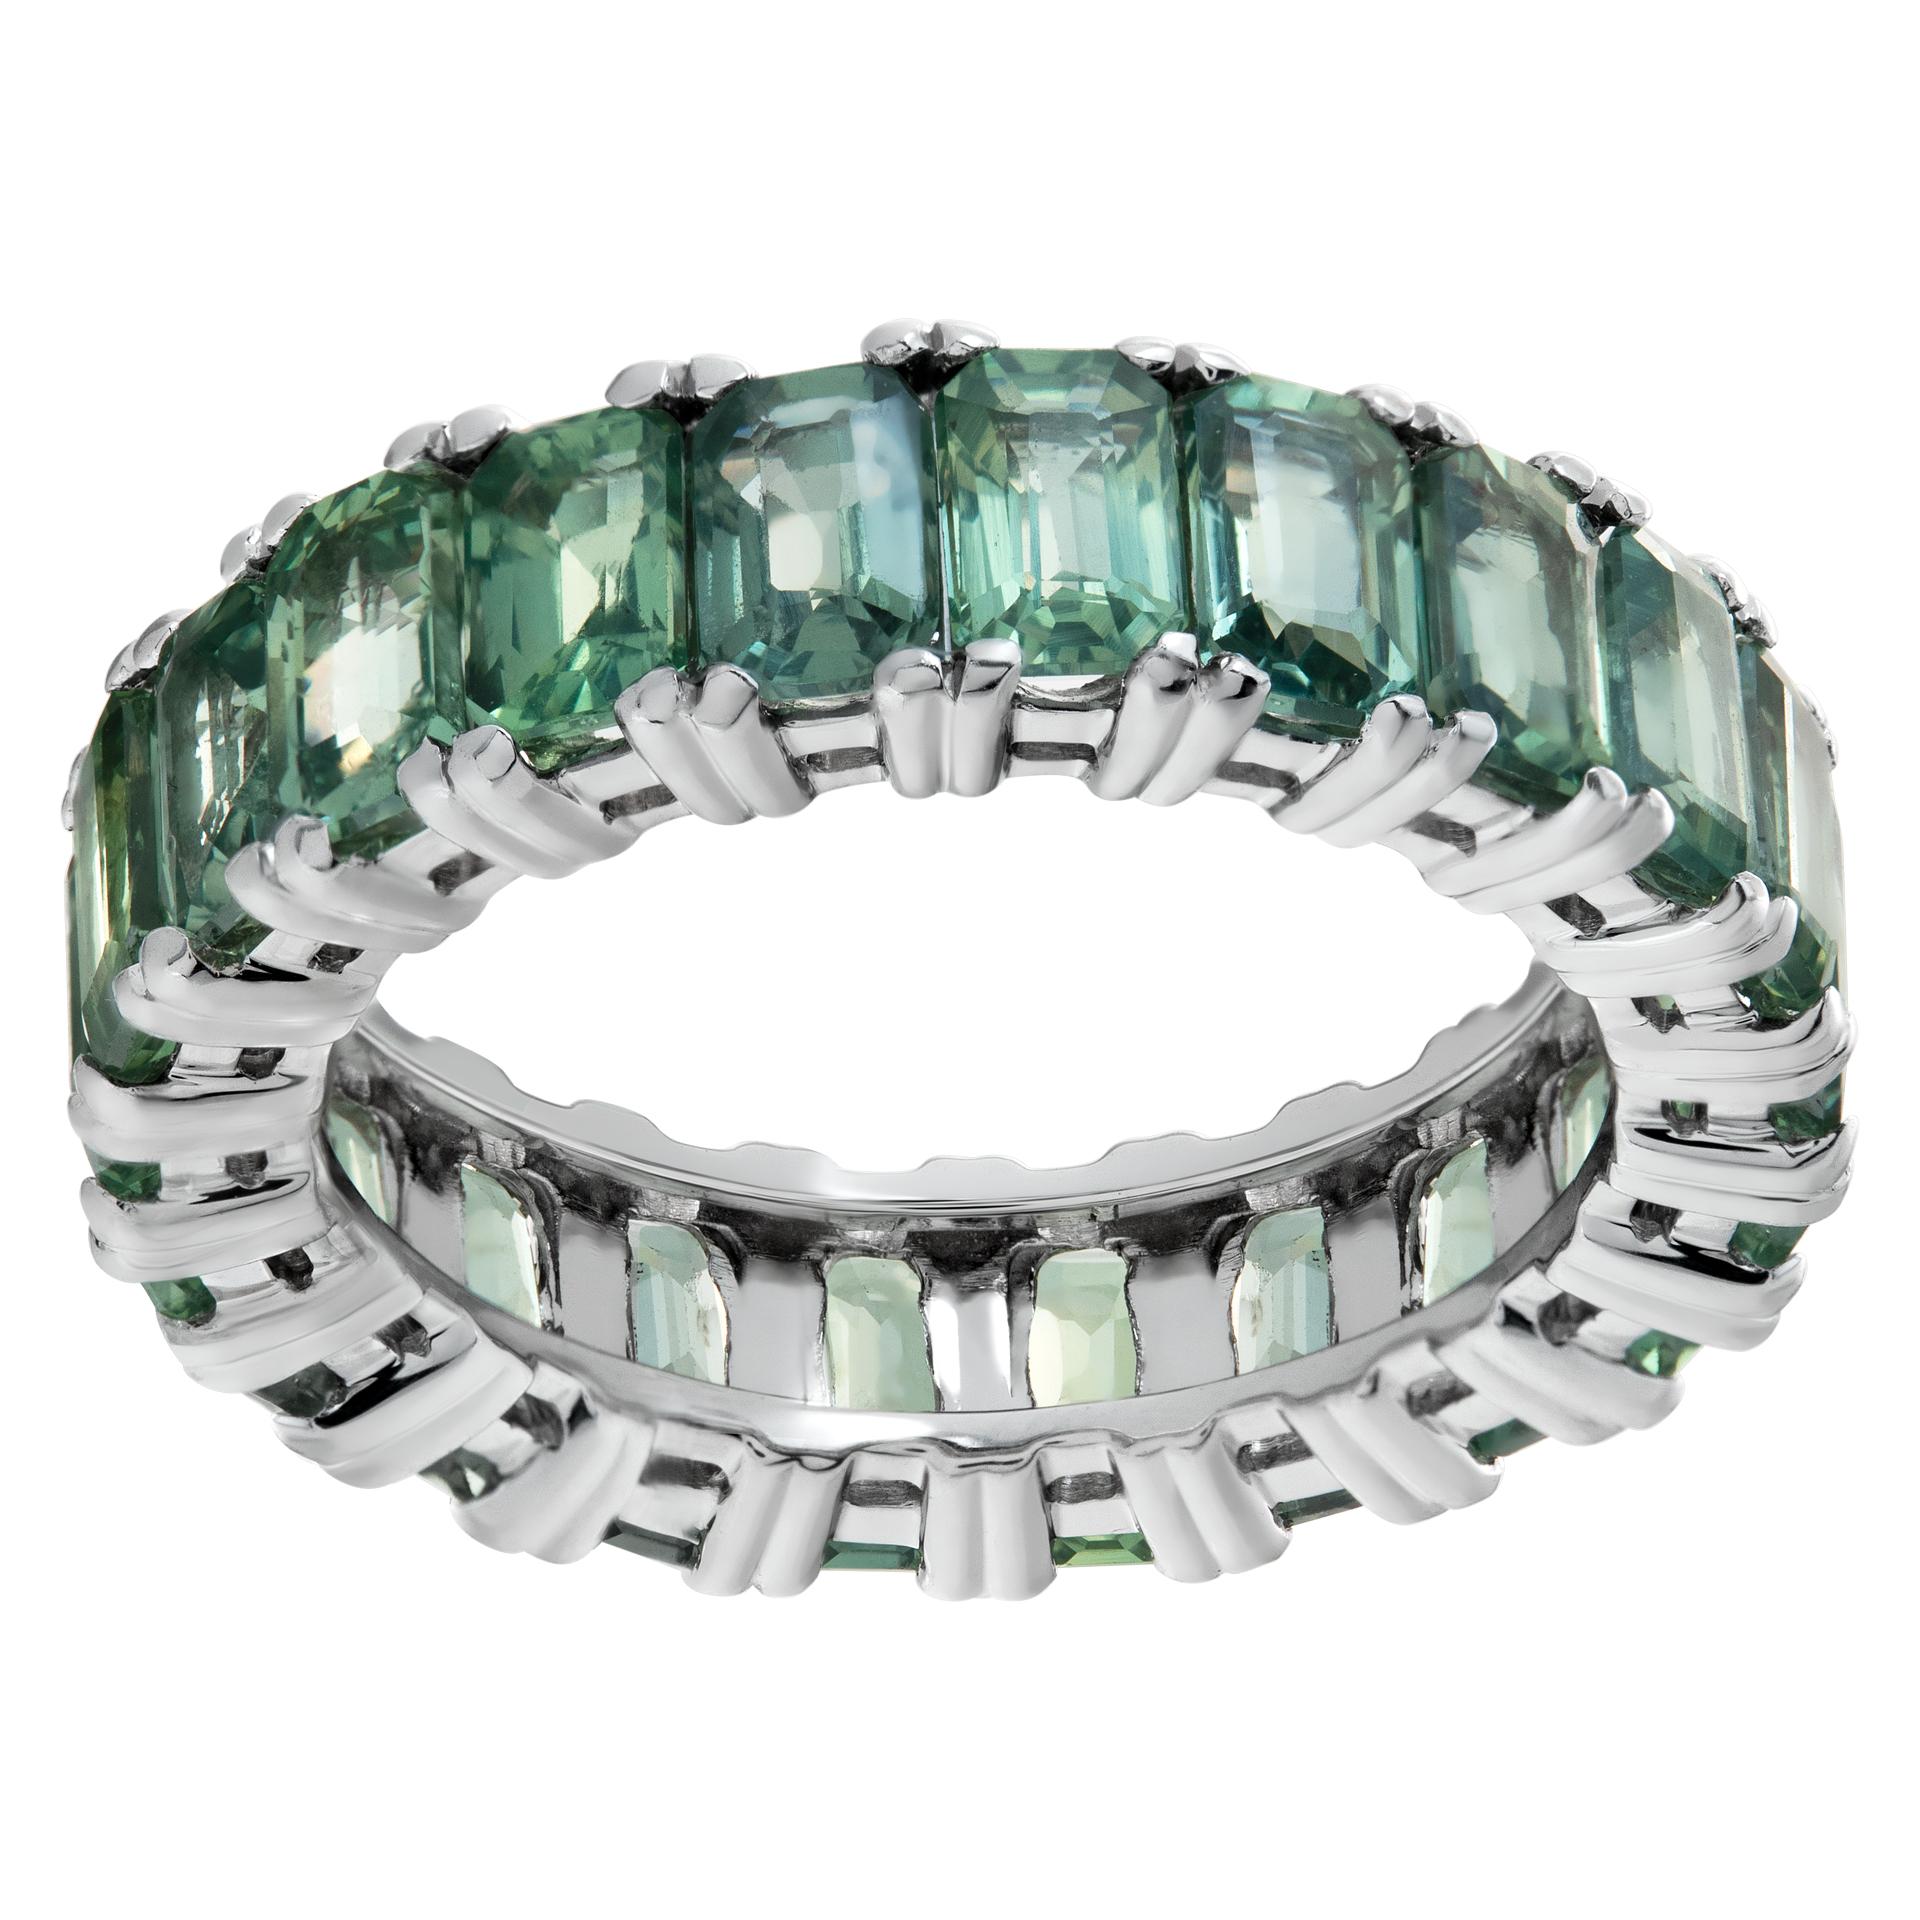 White gold green sapphire eternity band